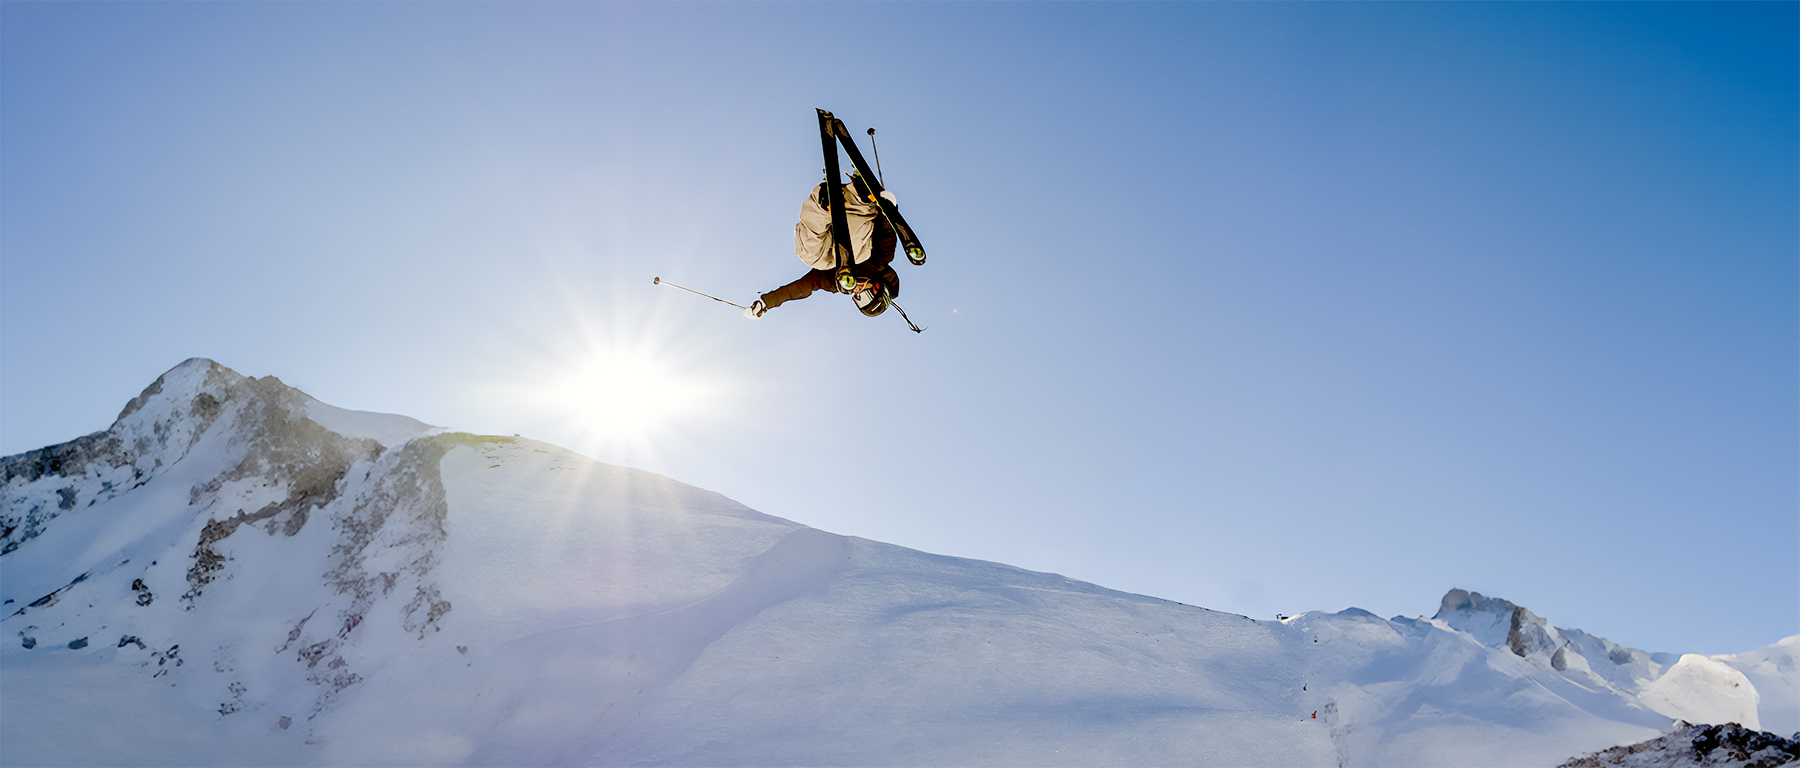 Vertra Guide: How to Choose the Best Sunscreen for Skiing